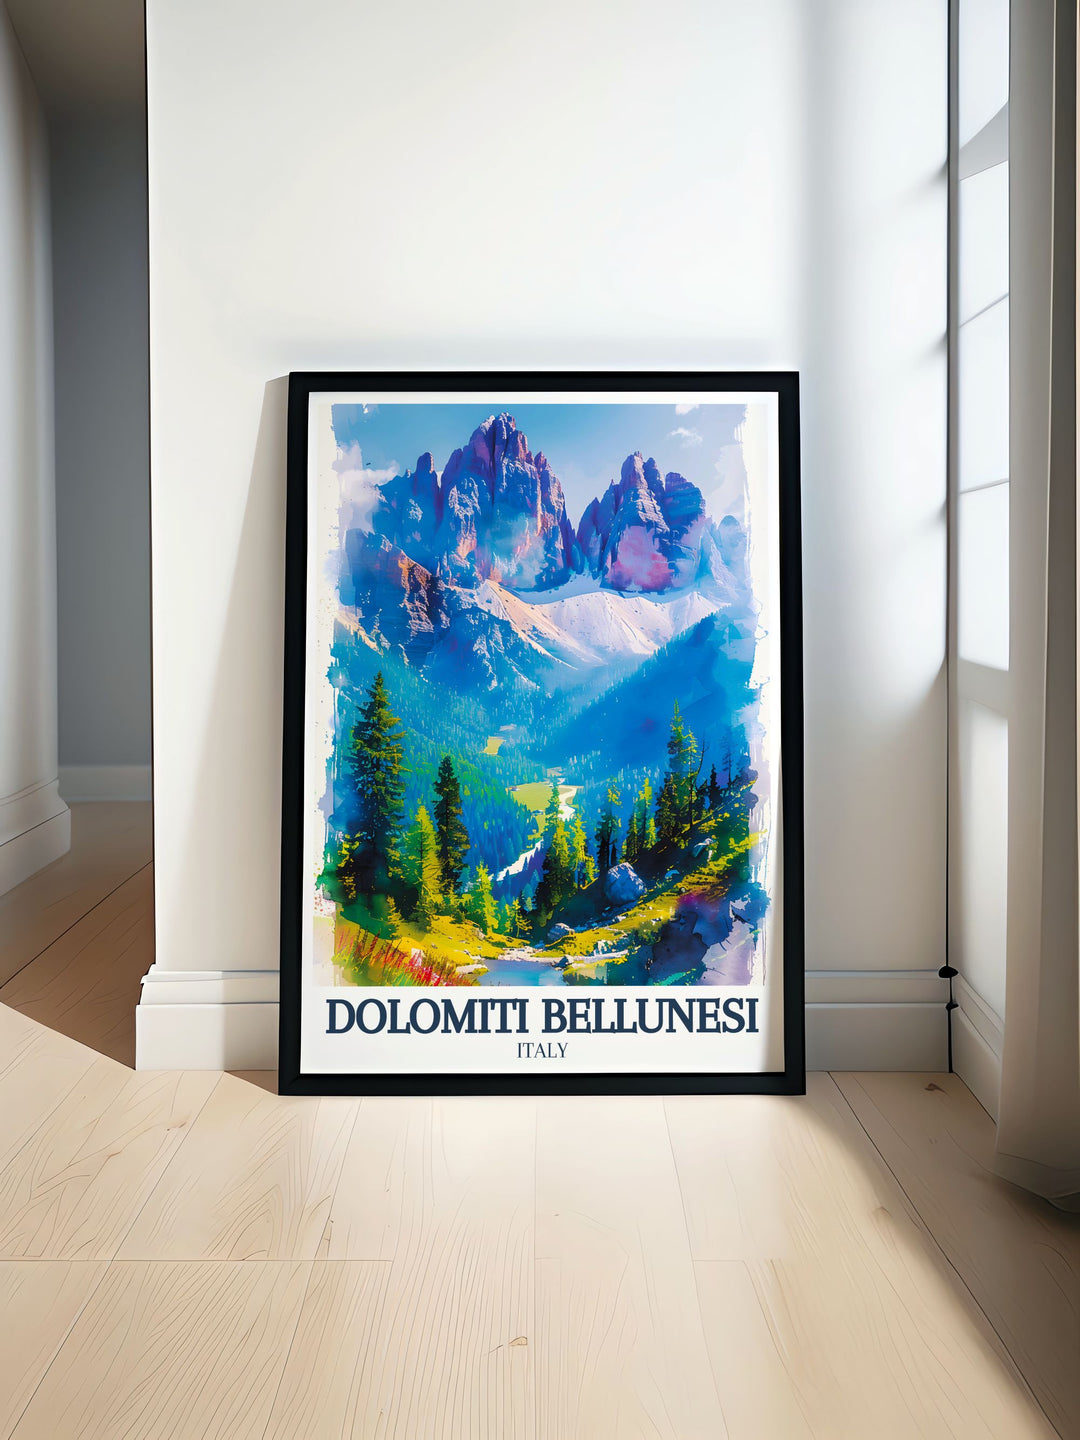 Dolomite range travel poster capturing the breathtaking beauty of the Dolomiti Bellunesi in Northern Italy perfect for enhancing your home decor with stunning views of the Italian mountains.